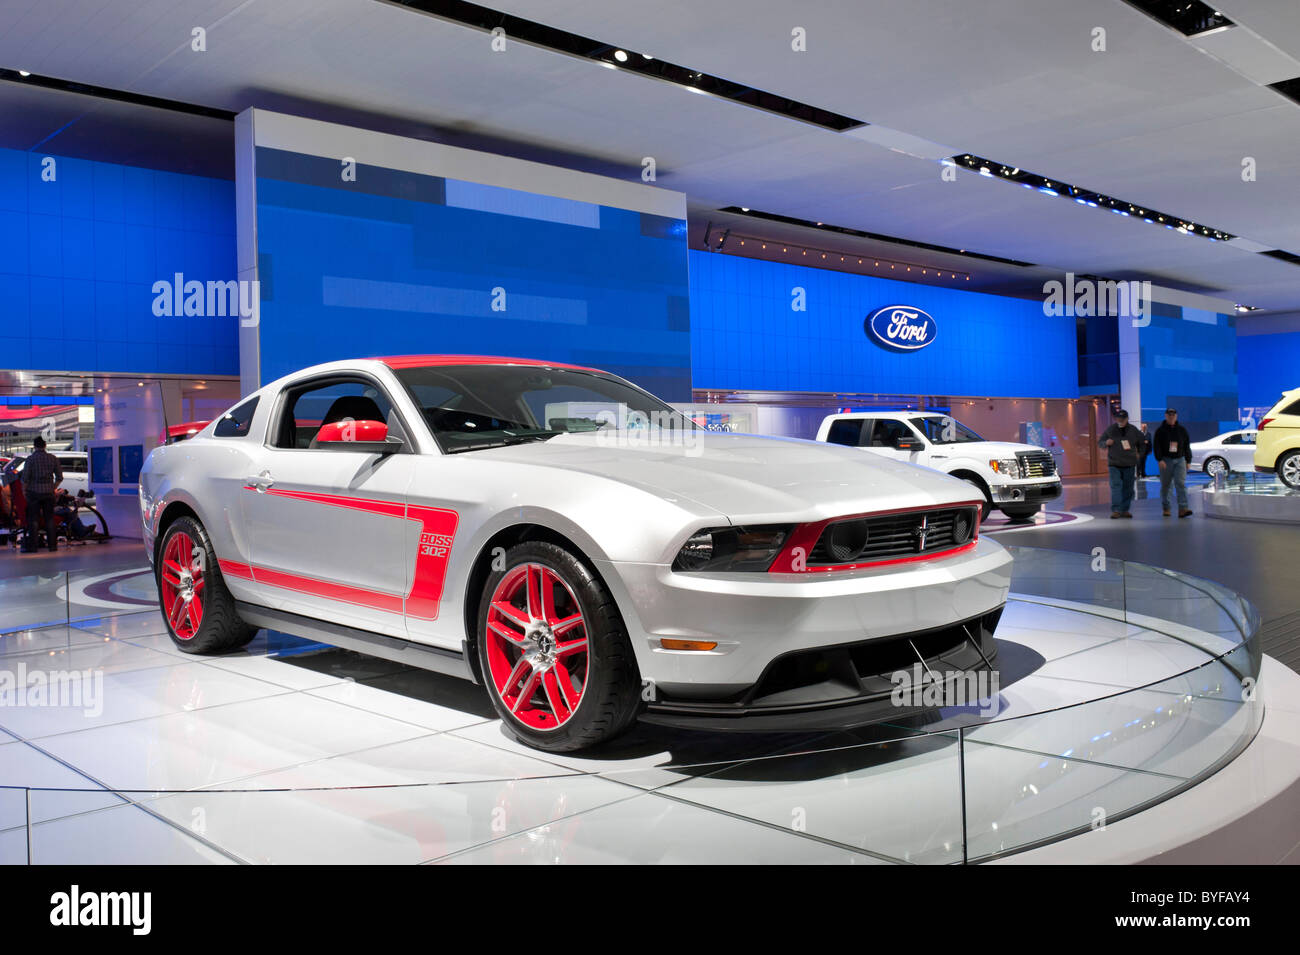 2012 Ford Mustang Boss 302 Laguna Seca at the 2011 North American International Auto Show in Detroit Stock Photo